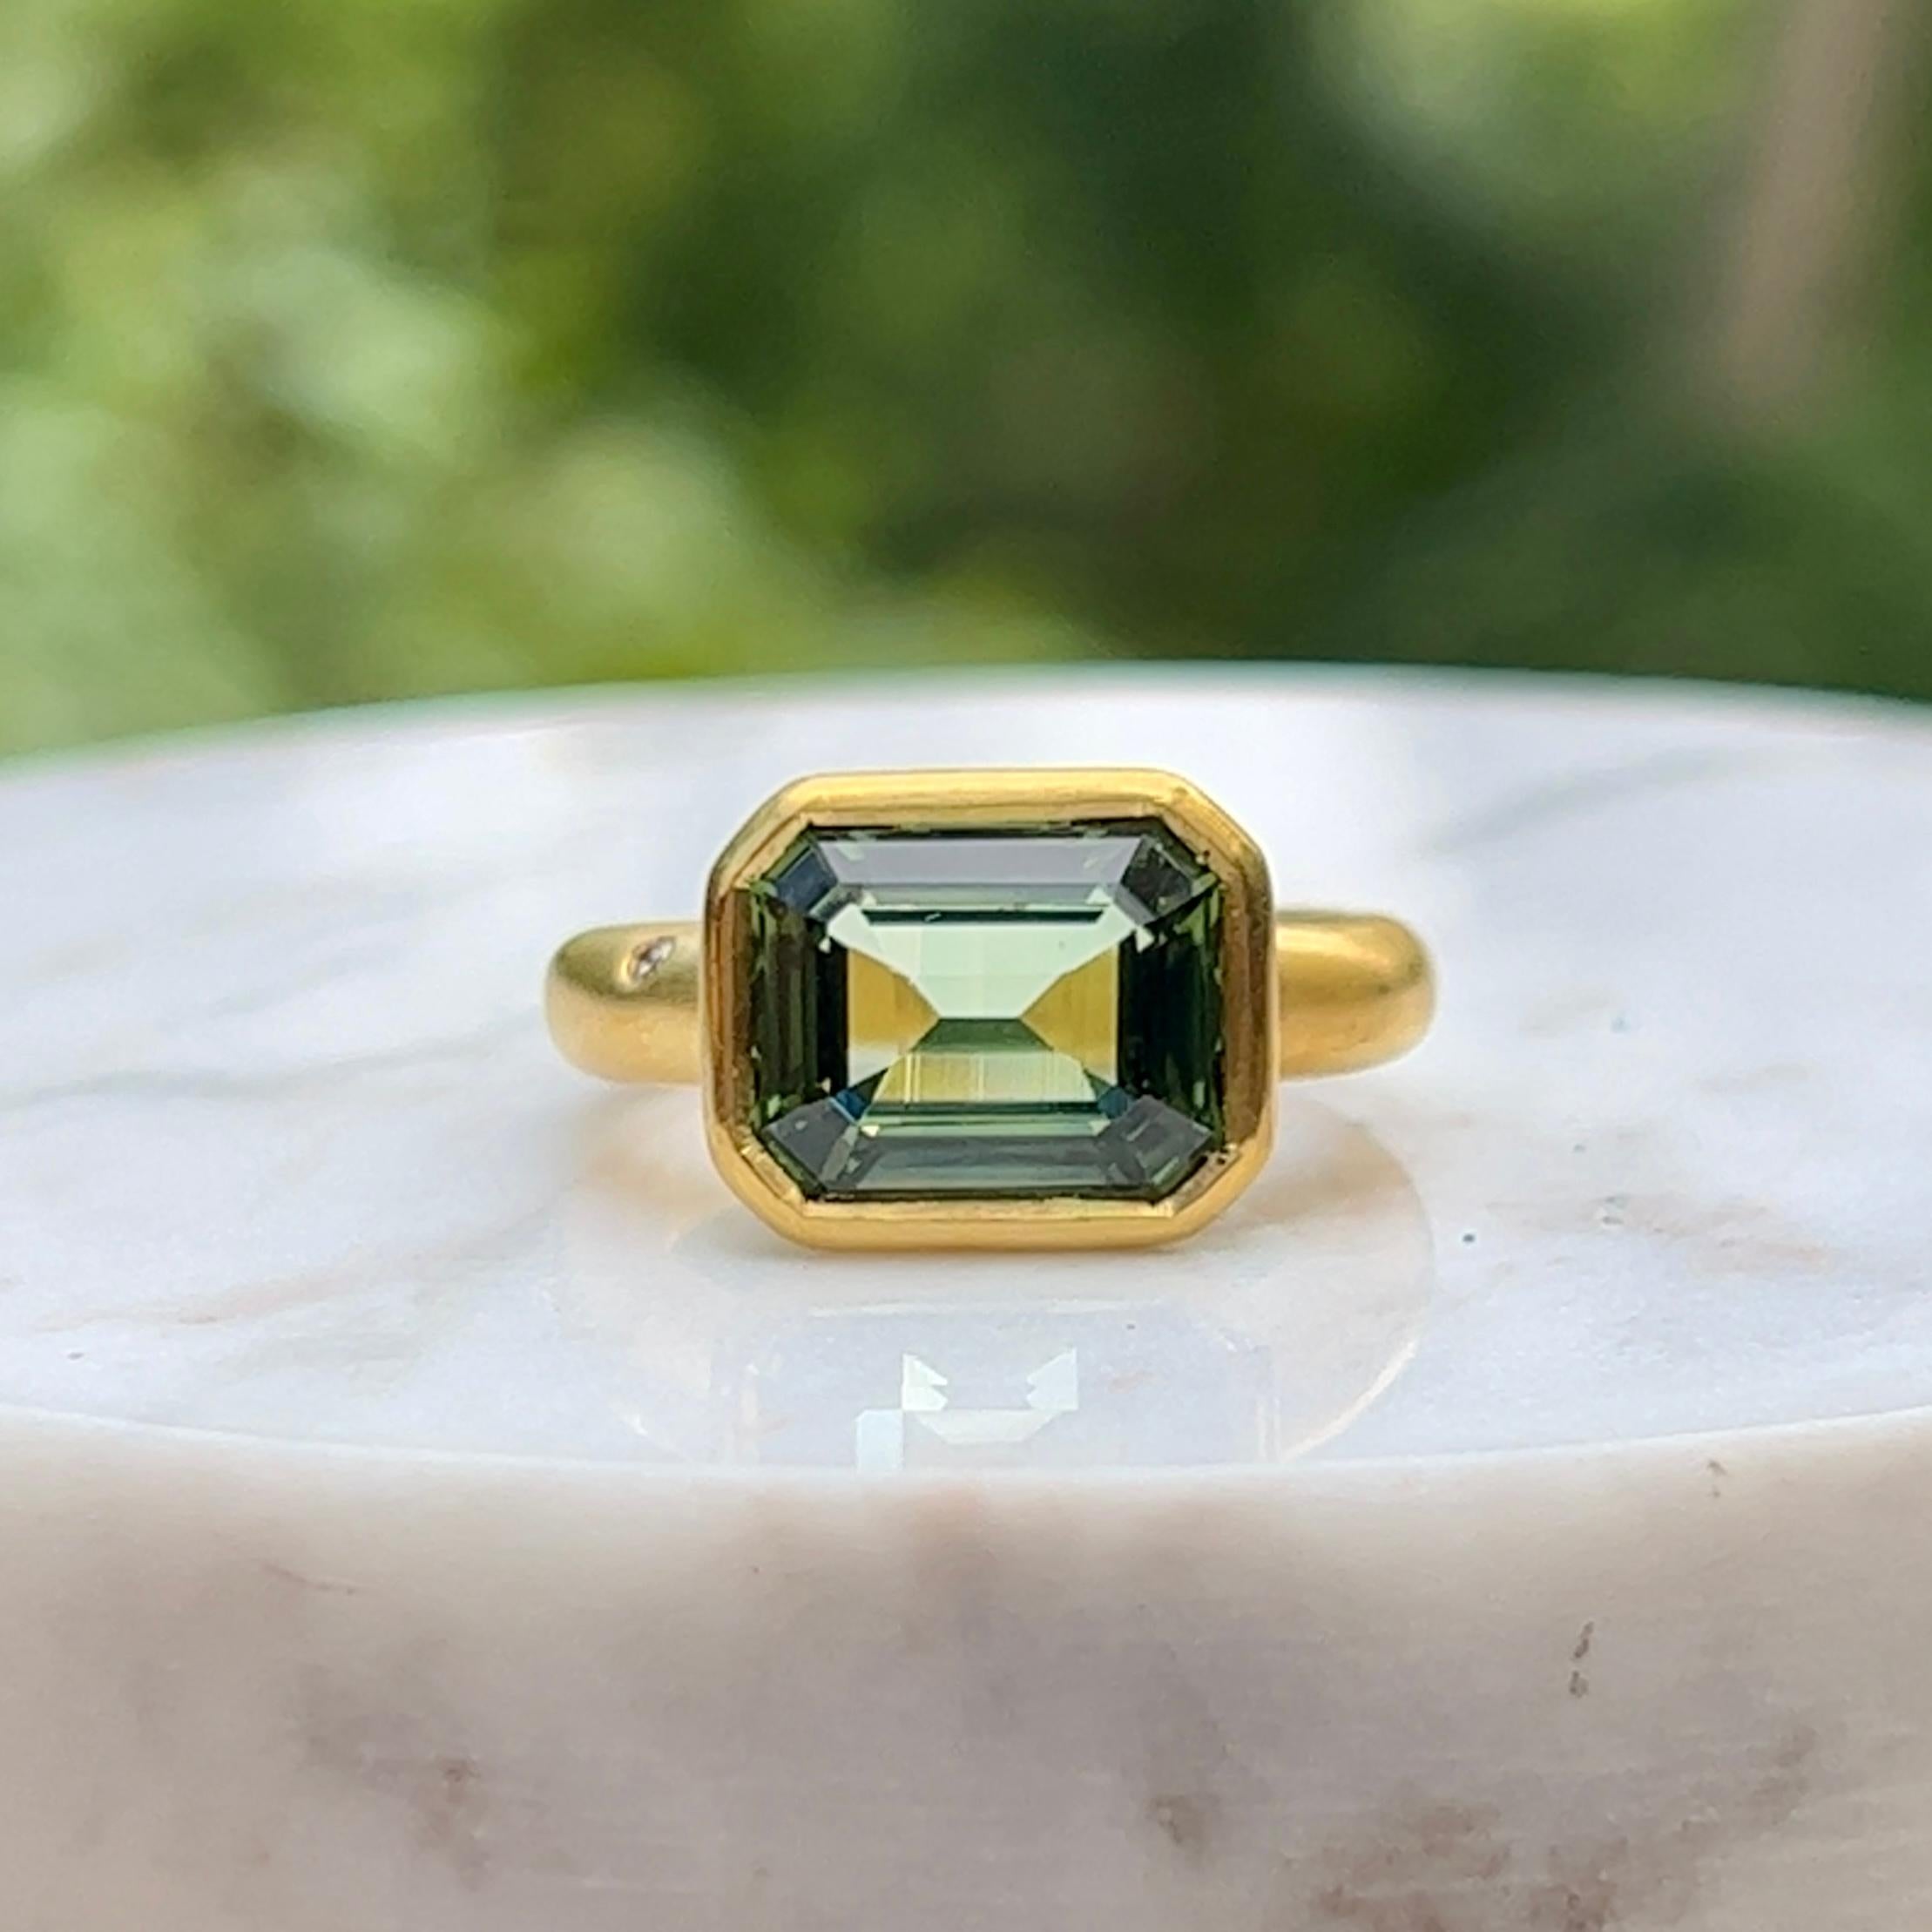 Contemporary H. Stern Green Tourmaline and Diamond Ring in 18K Gold